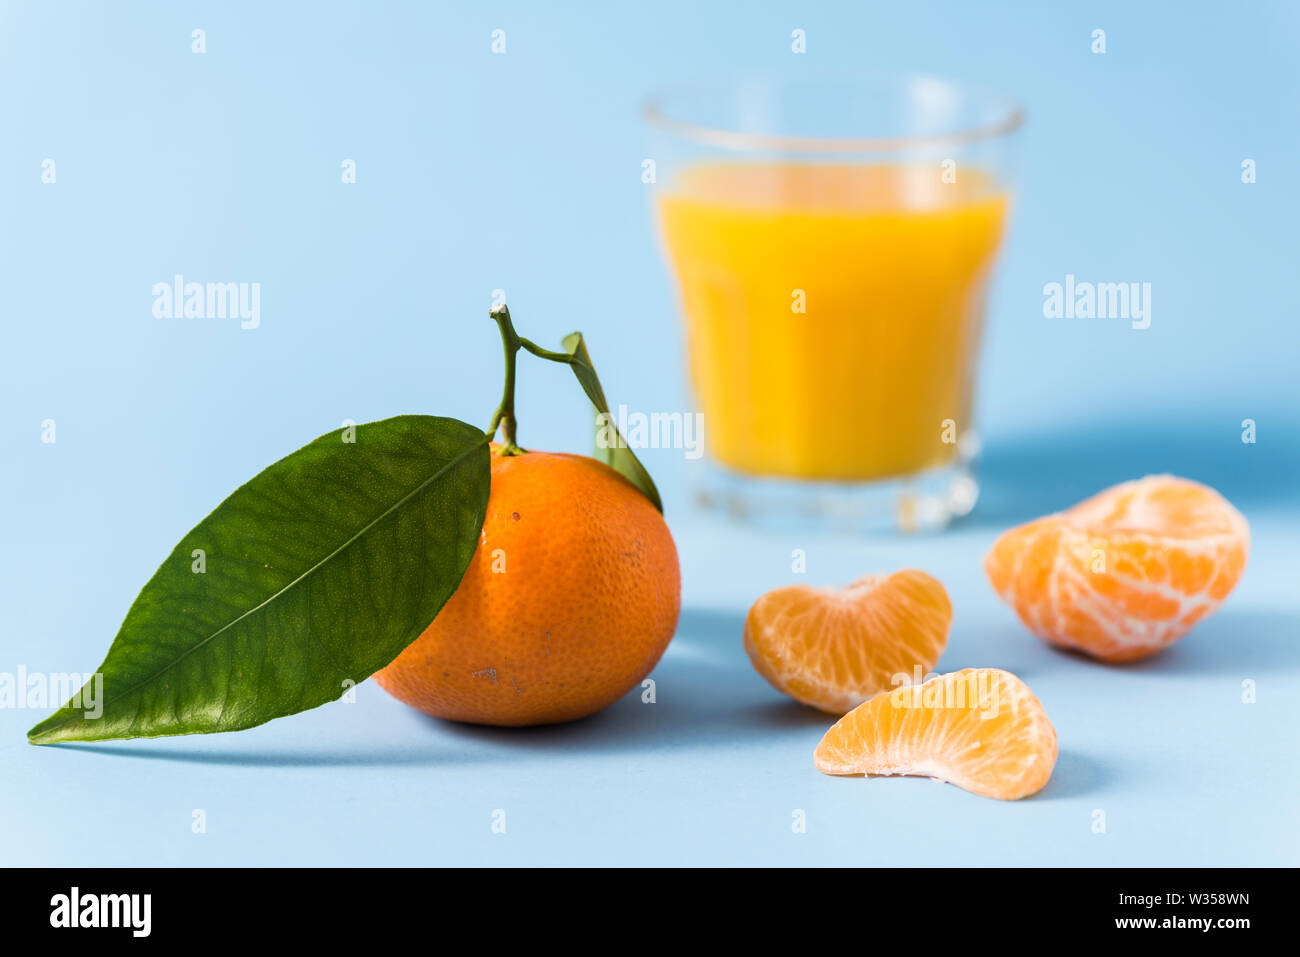 Leafy clementine, peeled clementine and glass of clementine juice on a pale blue background Stock Photo